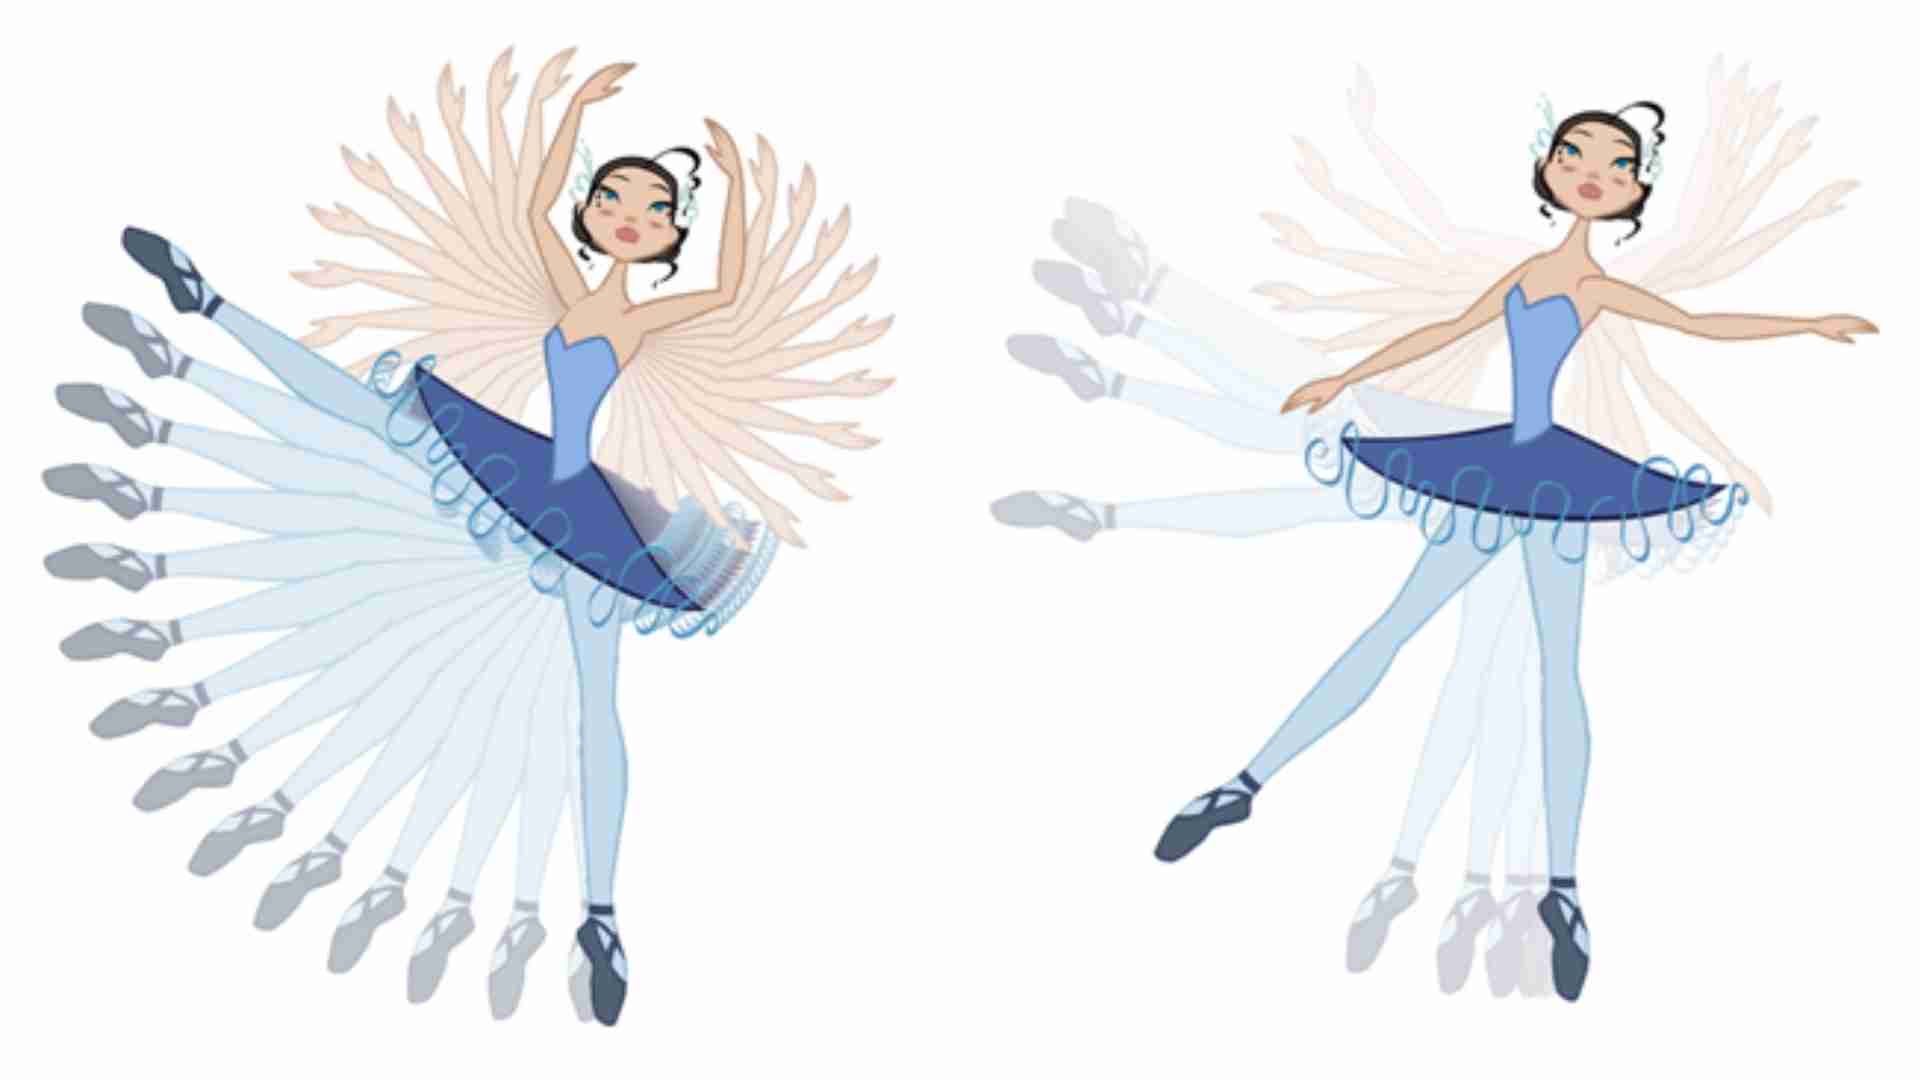 Girl ballerina as an example of the term Slow In & Slow Out